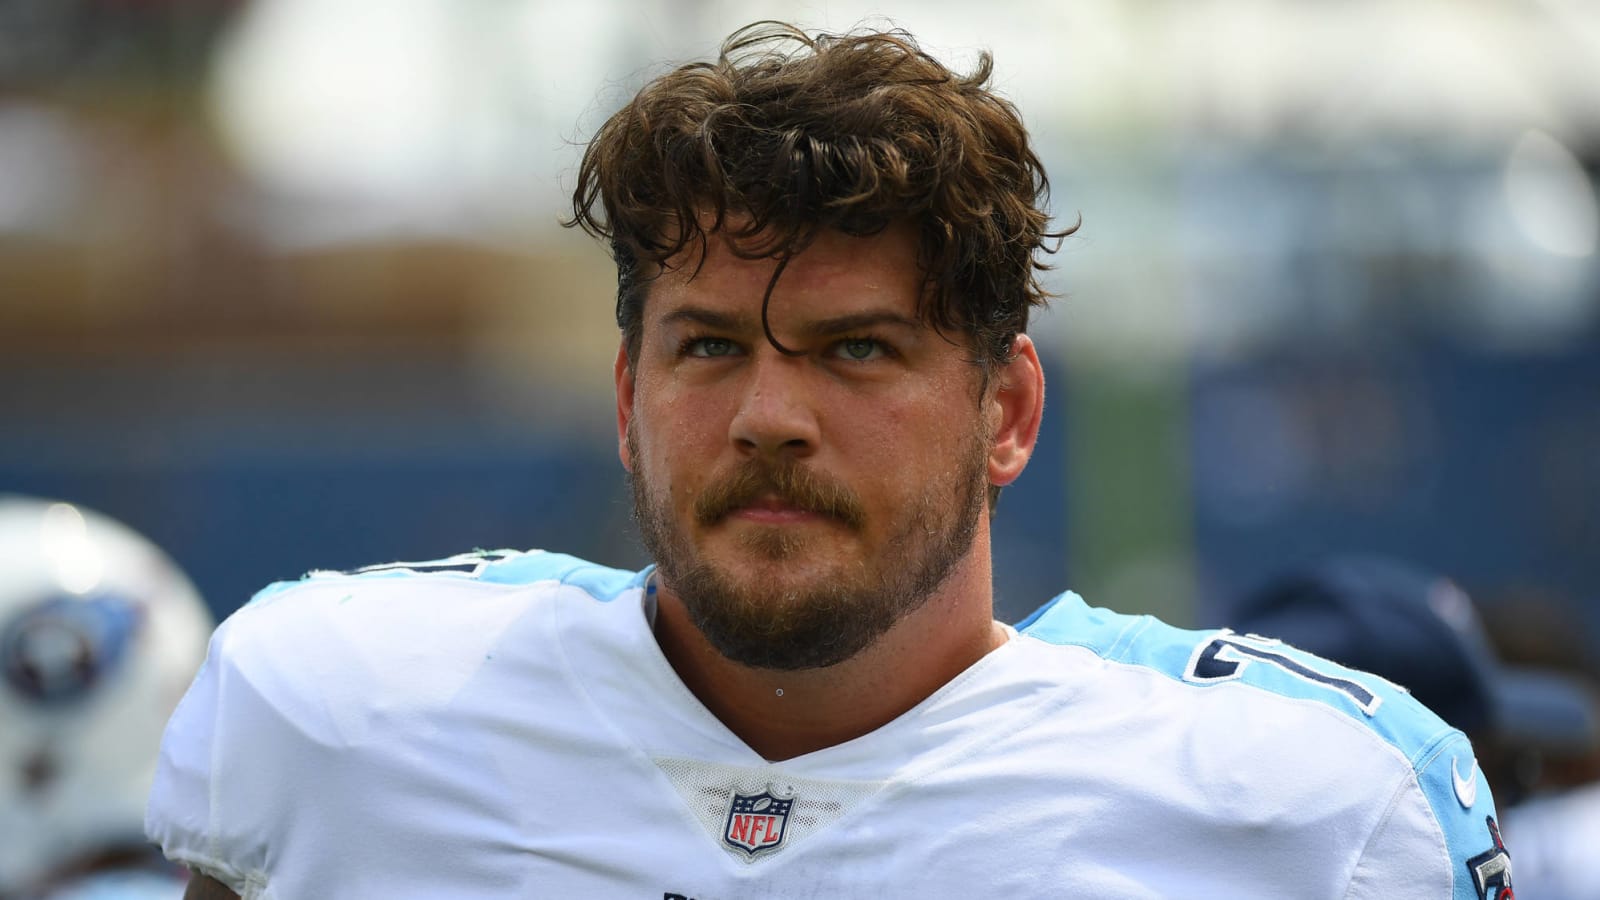 Watch: Taylor Lewan dresses up as Boss Hogg to celebrate huge contract